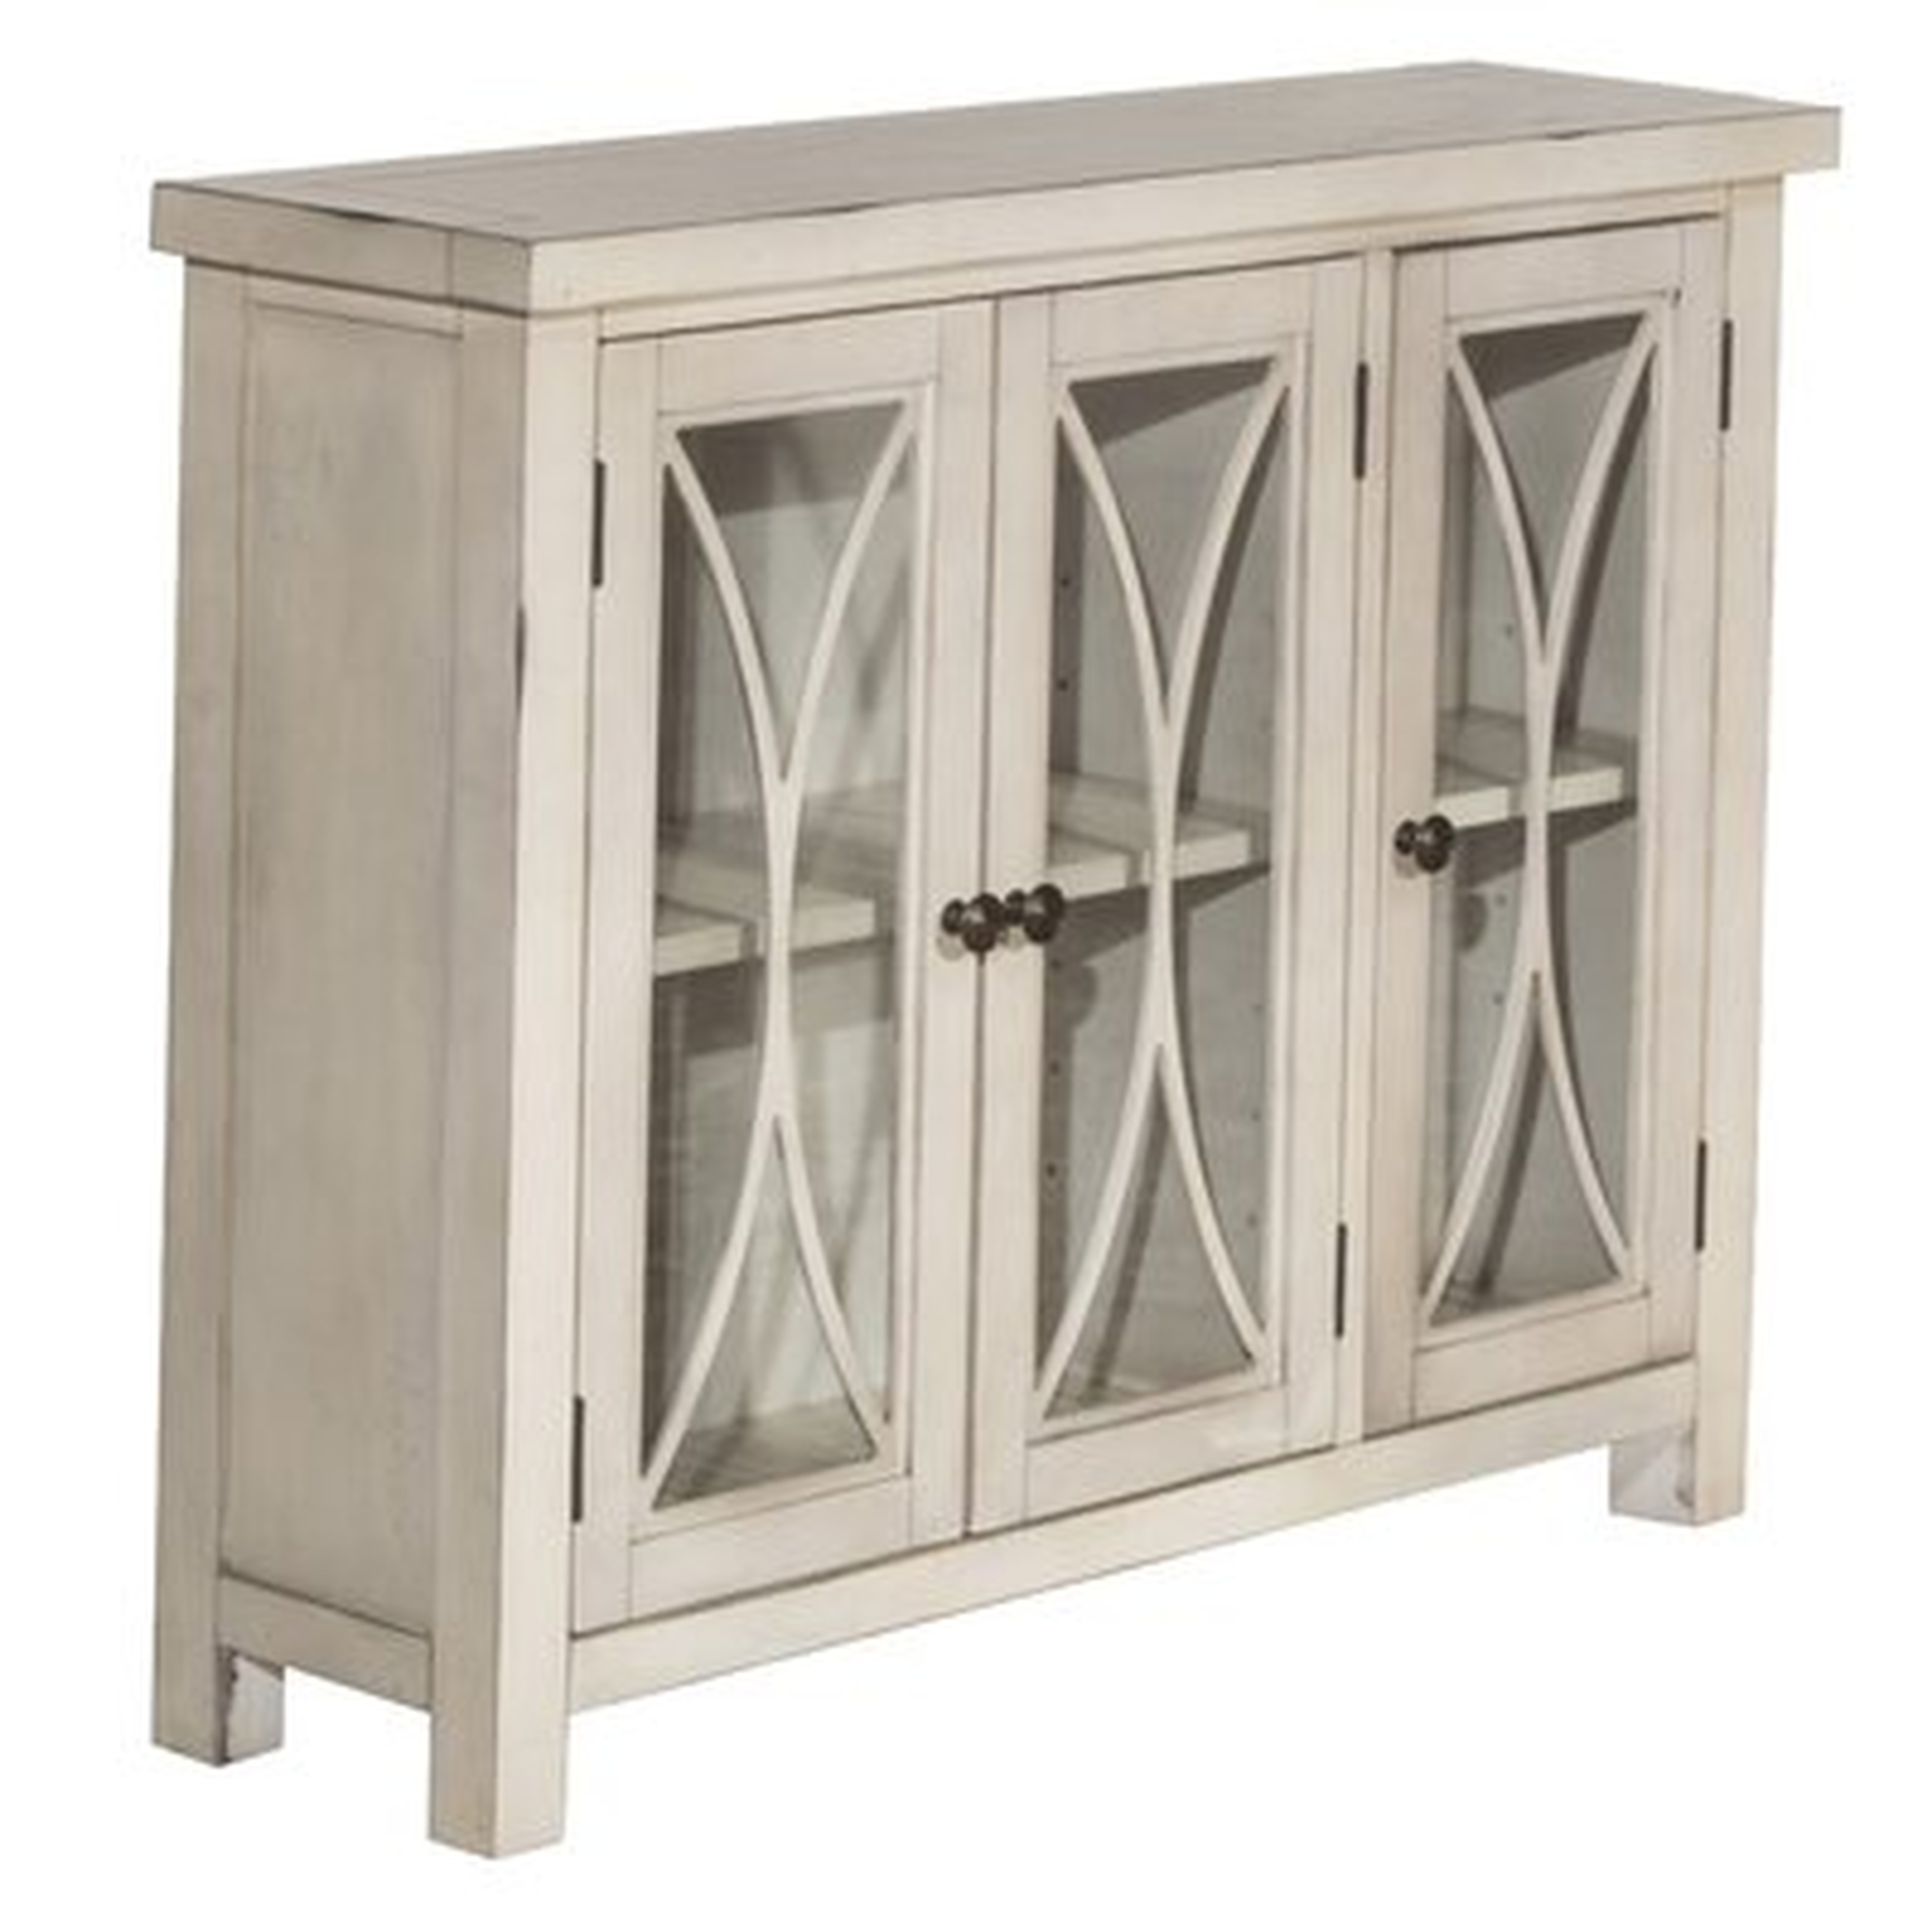 Chatham Square 3 Door Accent Cabinet - Wayfair